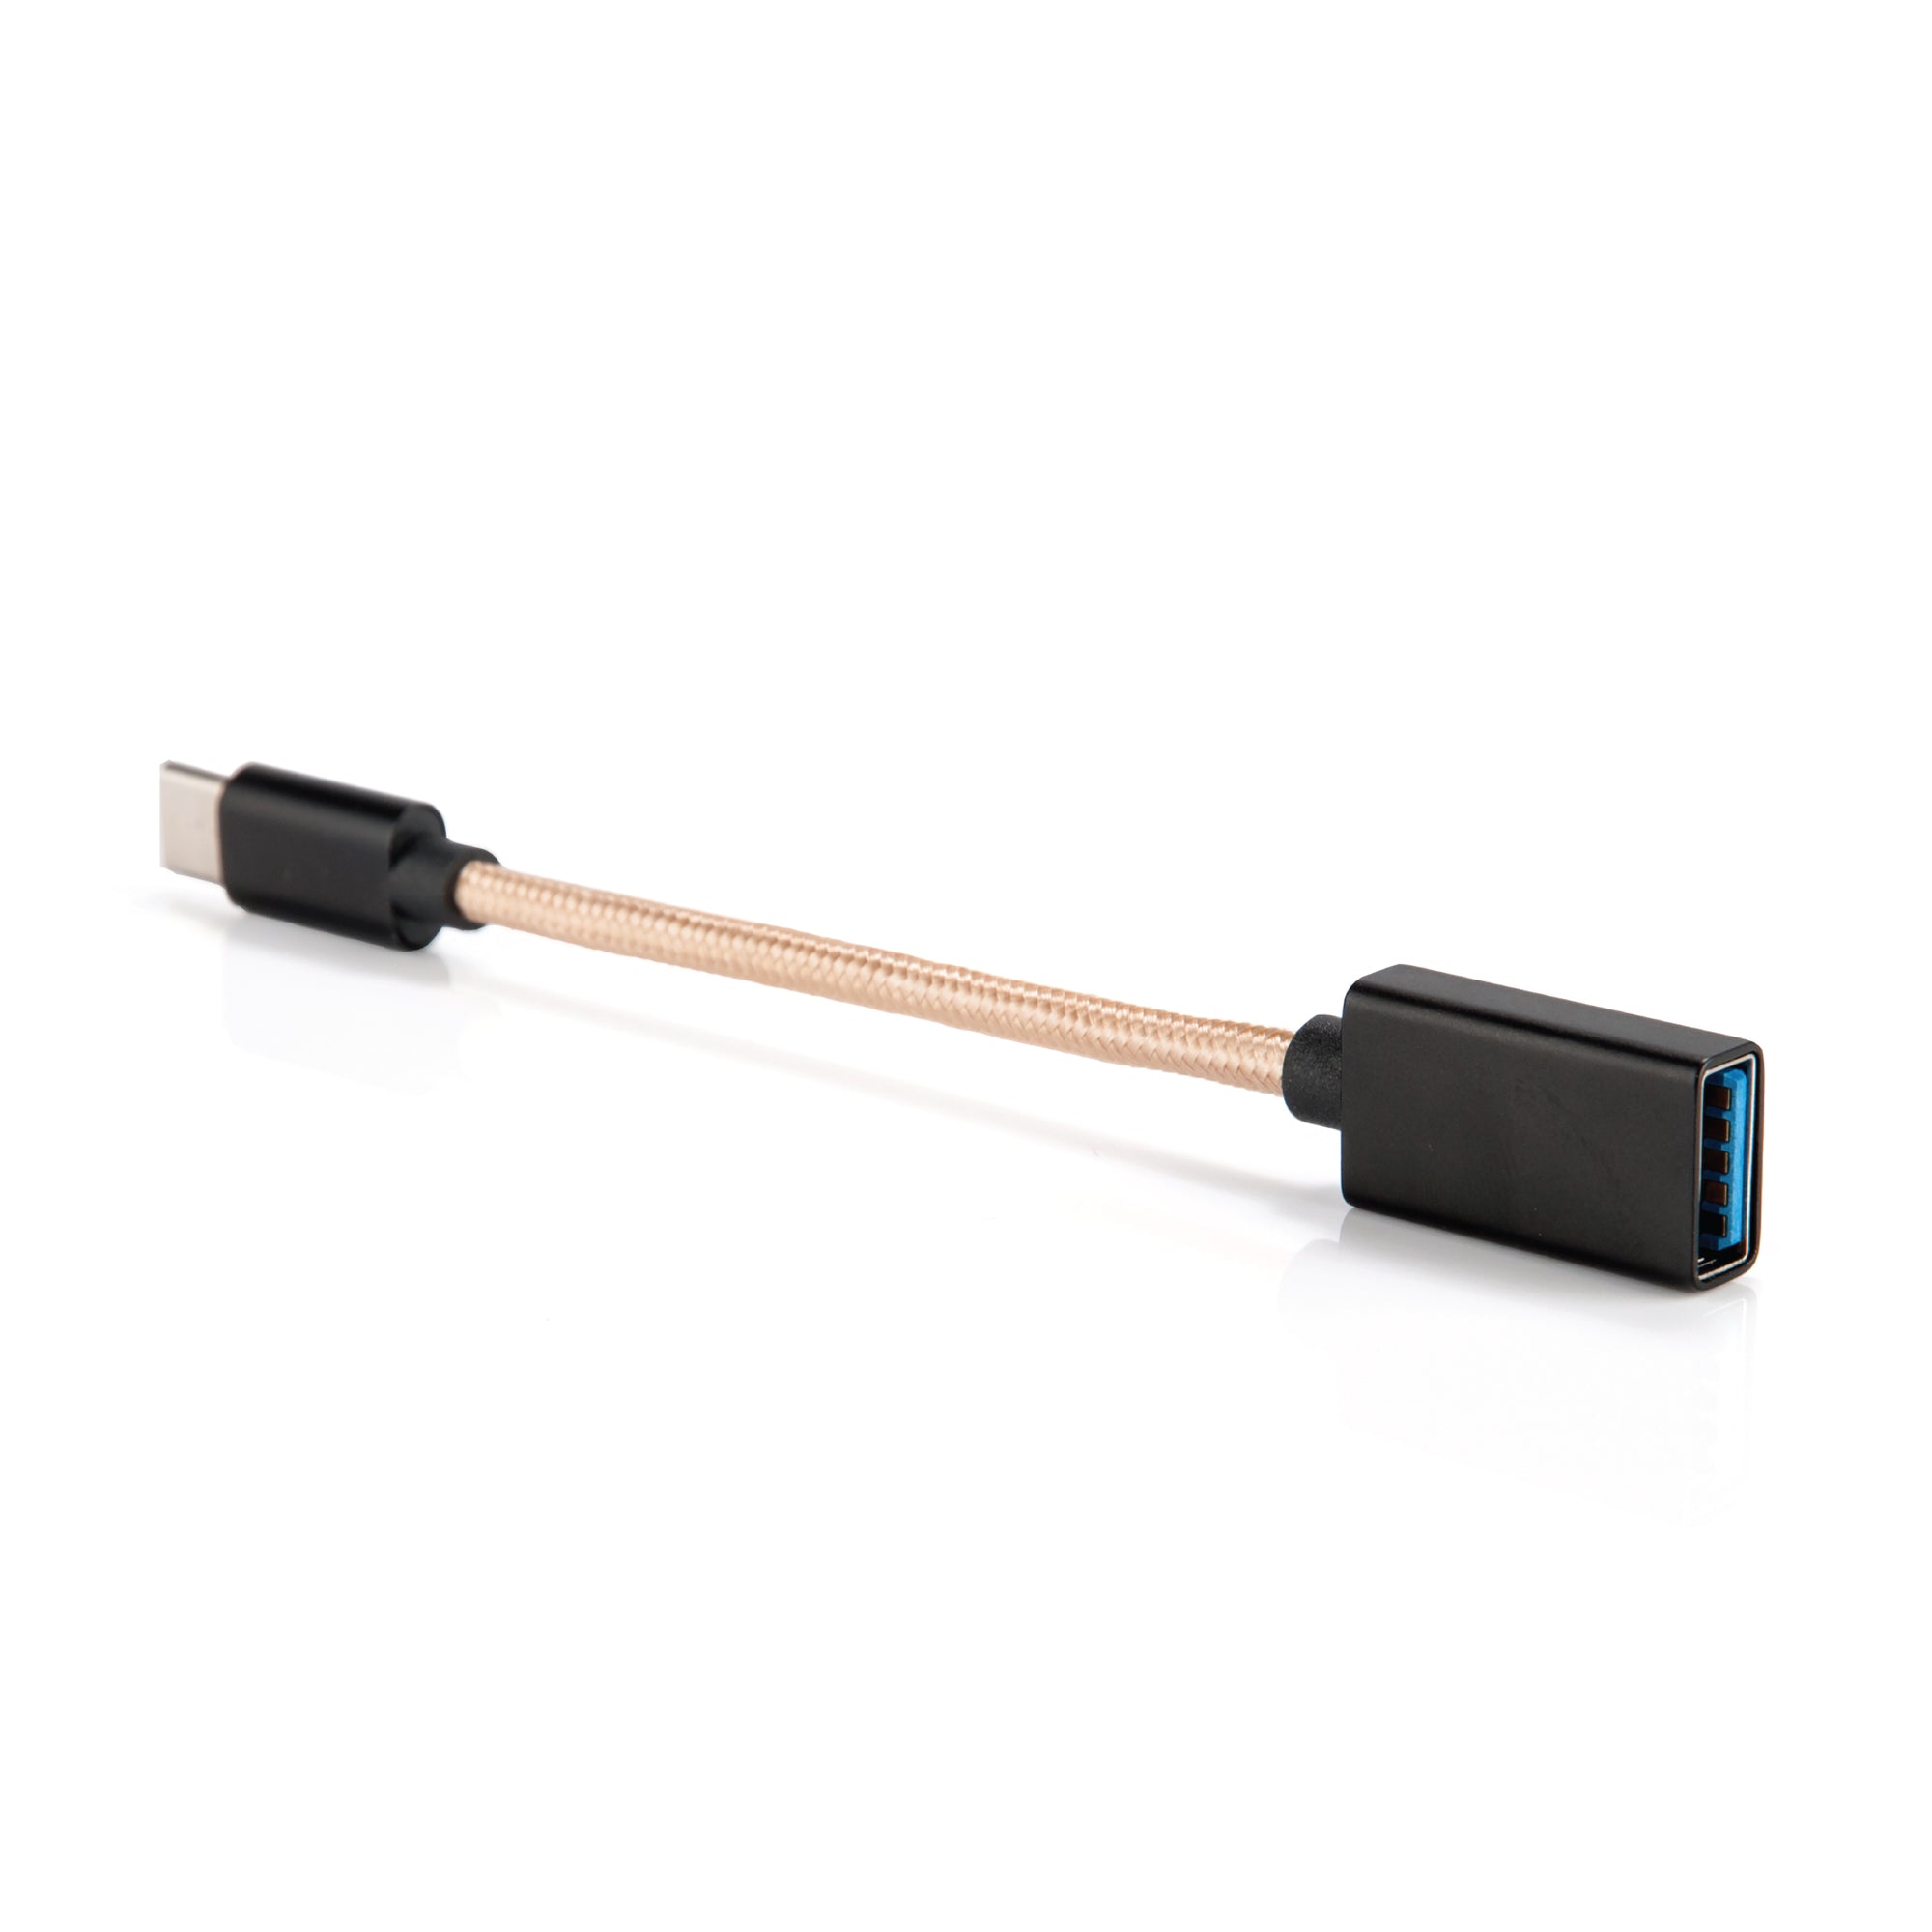 iFi Audio USB 3.0 Type-C to USB Type-A OTG Cable